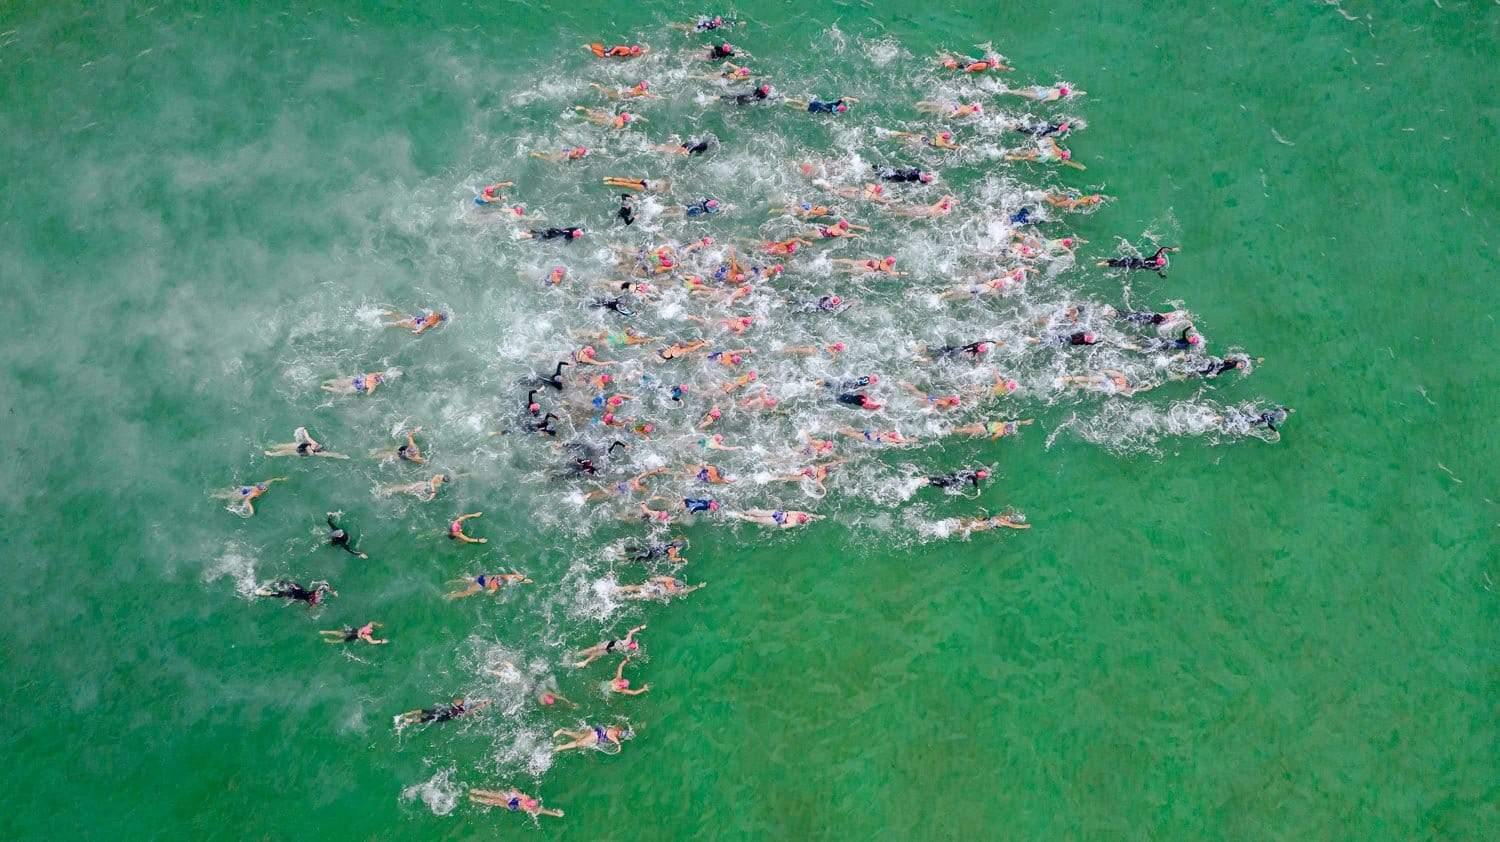 Aerial view of a green water beach with a lot of people in the water, MMAD Swimmers - Mornington Peninsula VIC 